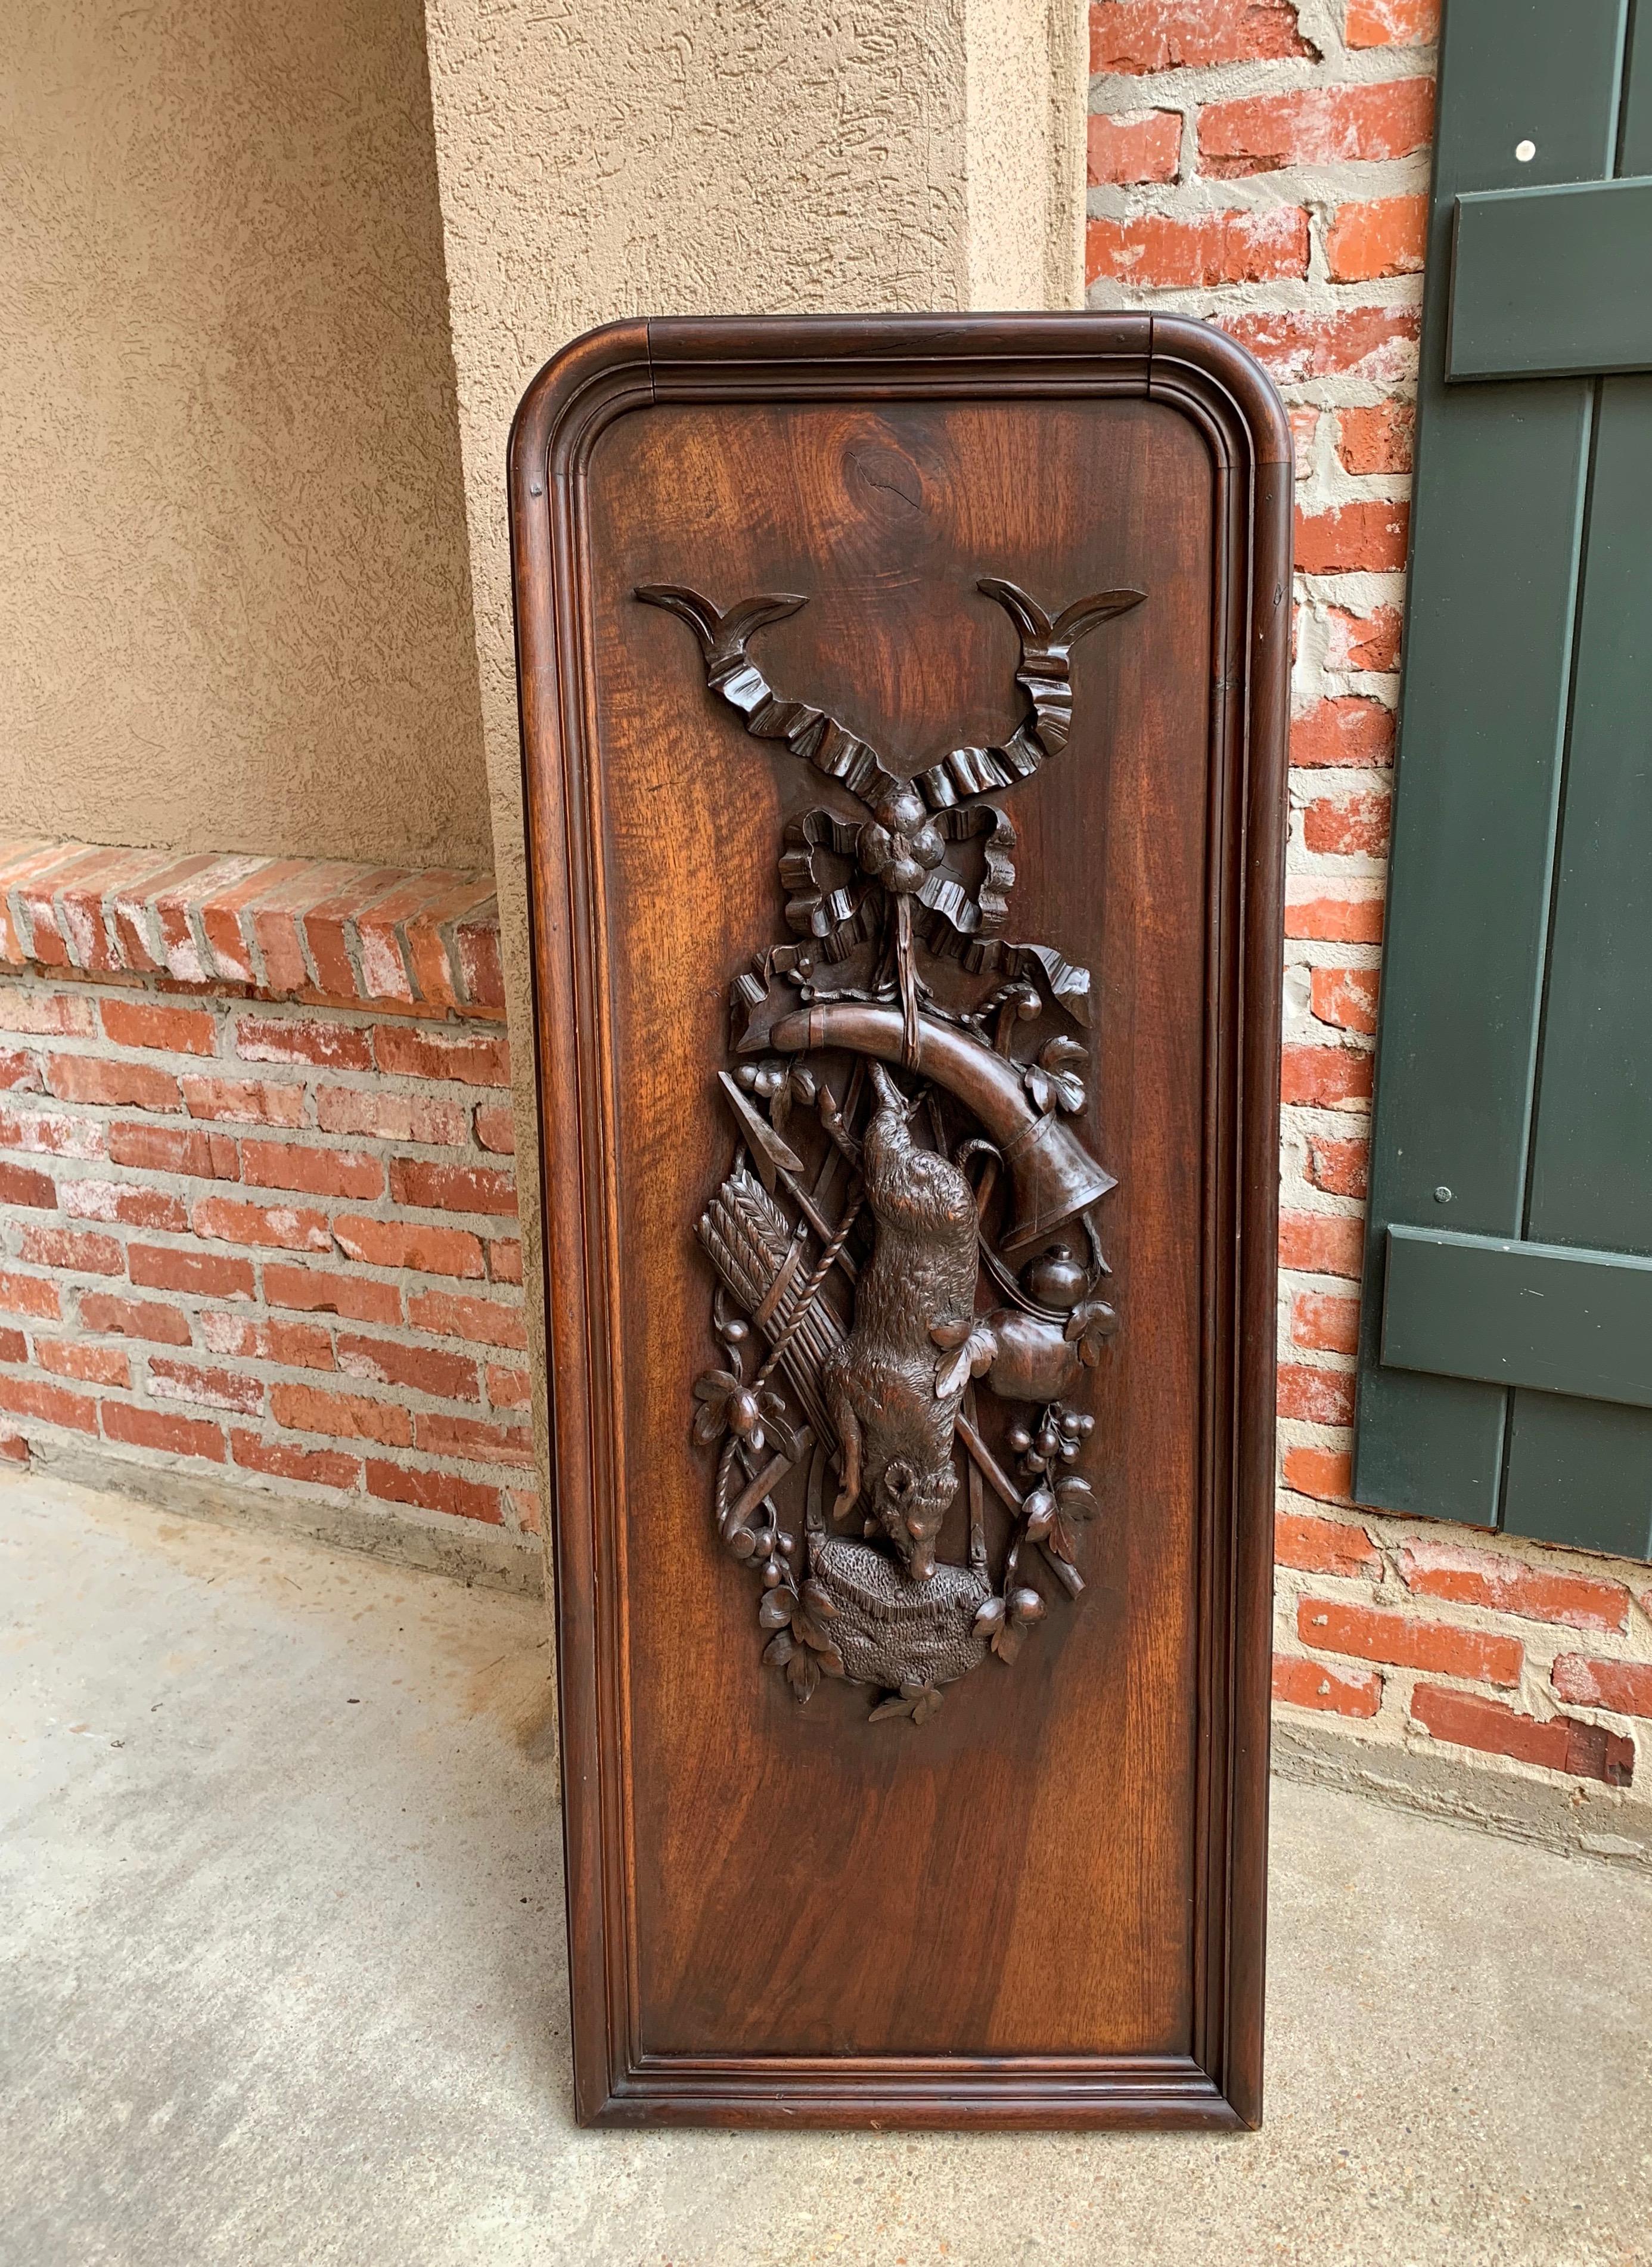 ~Direct from Europe~
~A very large, hand carved Black Forest Hunt wall hanging~
~Yes, it is one of two that are available, the other hanging is sold separately~ 
~Large, dome top panel is over 4 ft. tall, sure to command attention in any room on